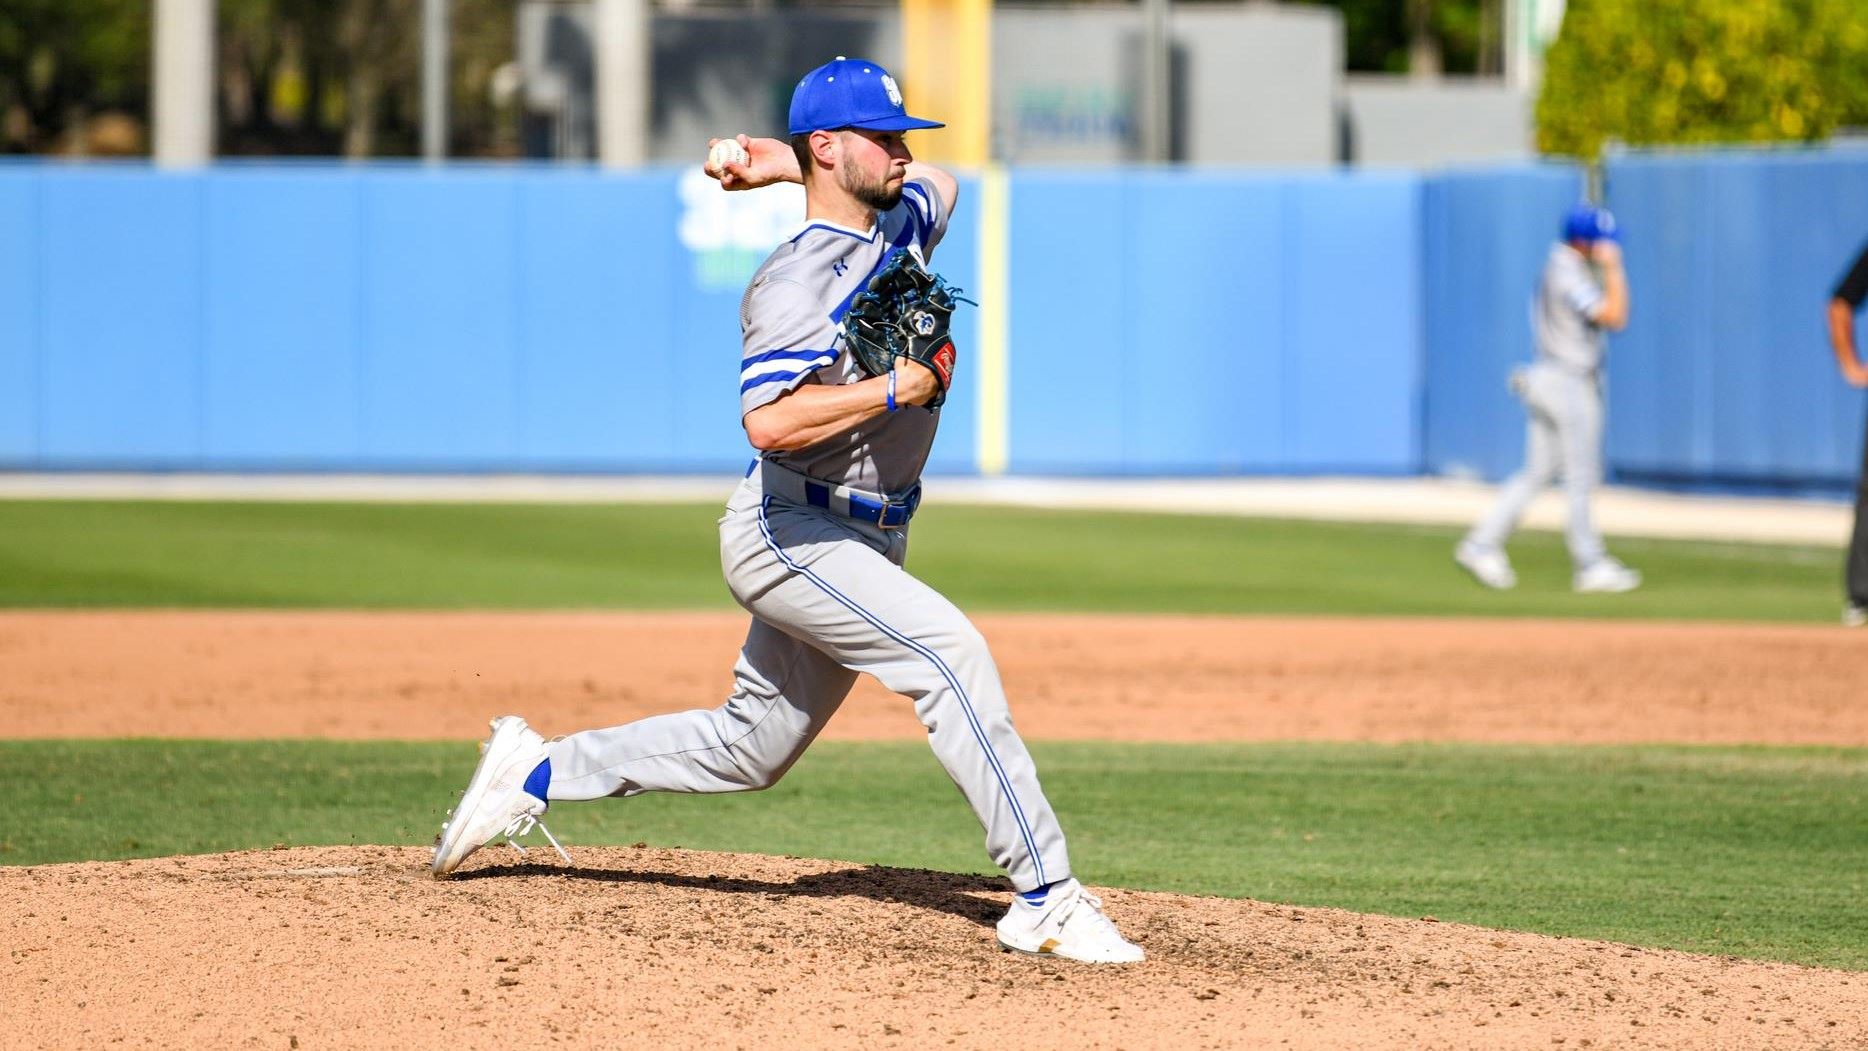 A Seton Hall baseball pitcher attempts a throw on the mound during a game.